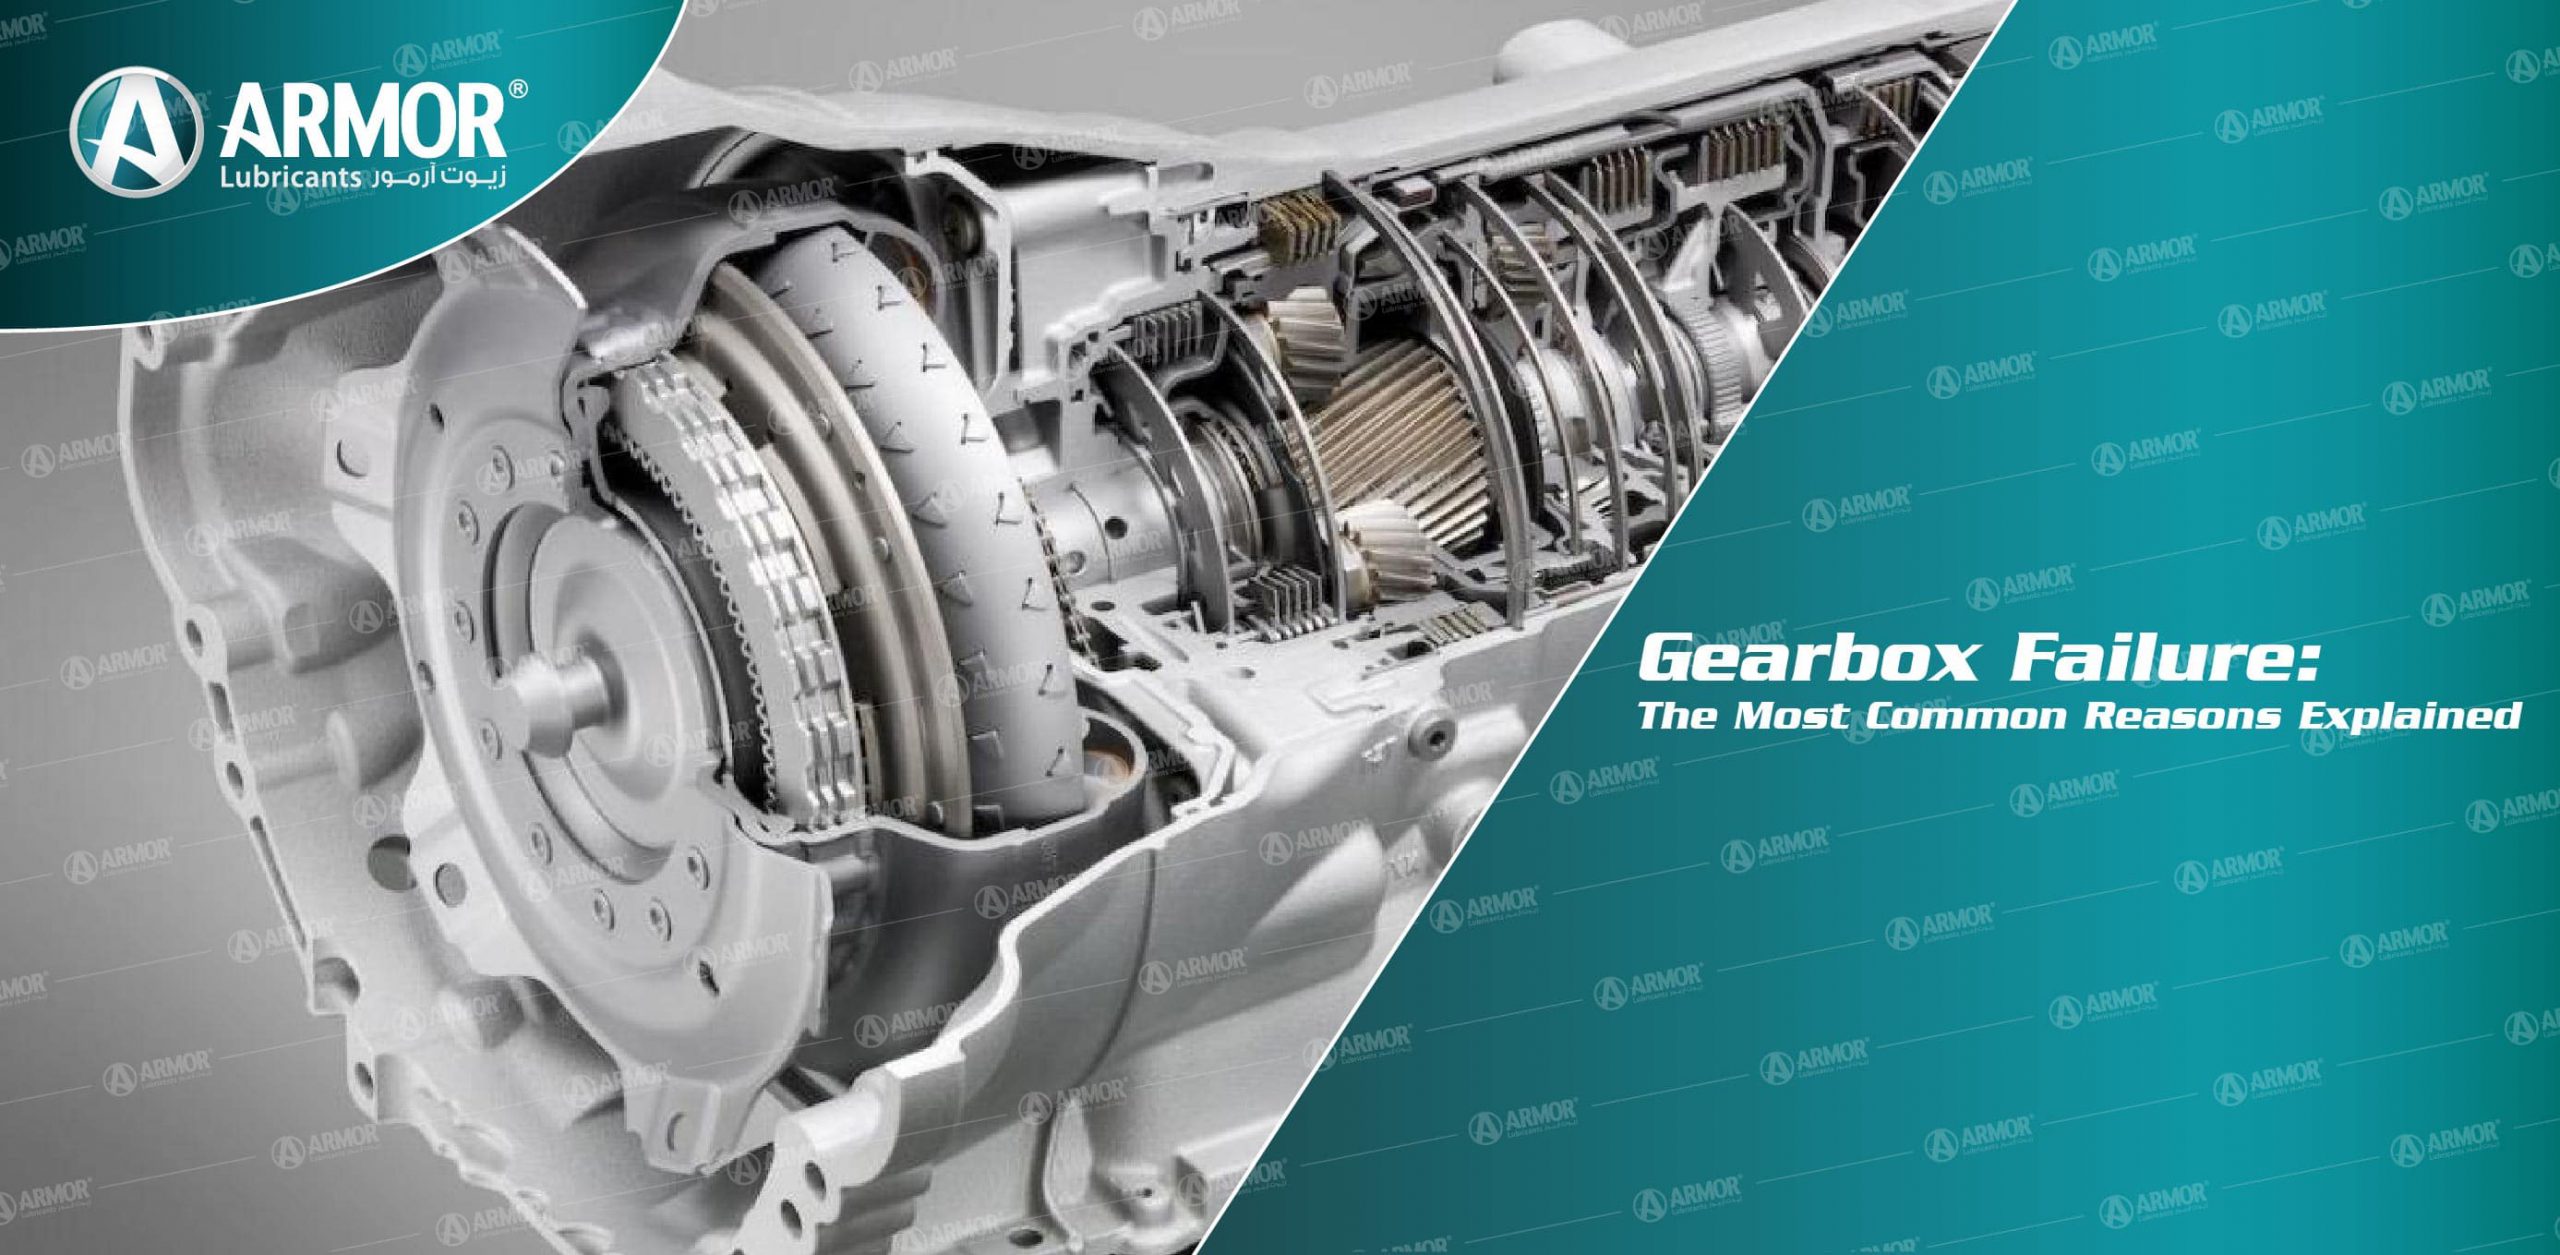 Gearbox Failure The Most Common Reasons Explained